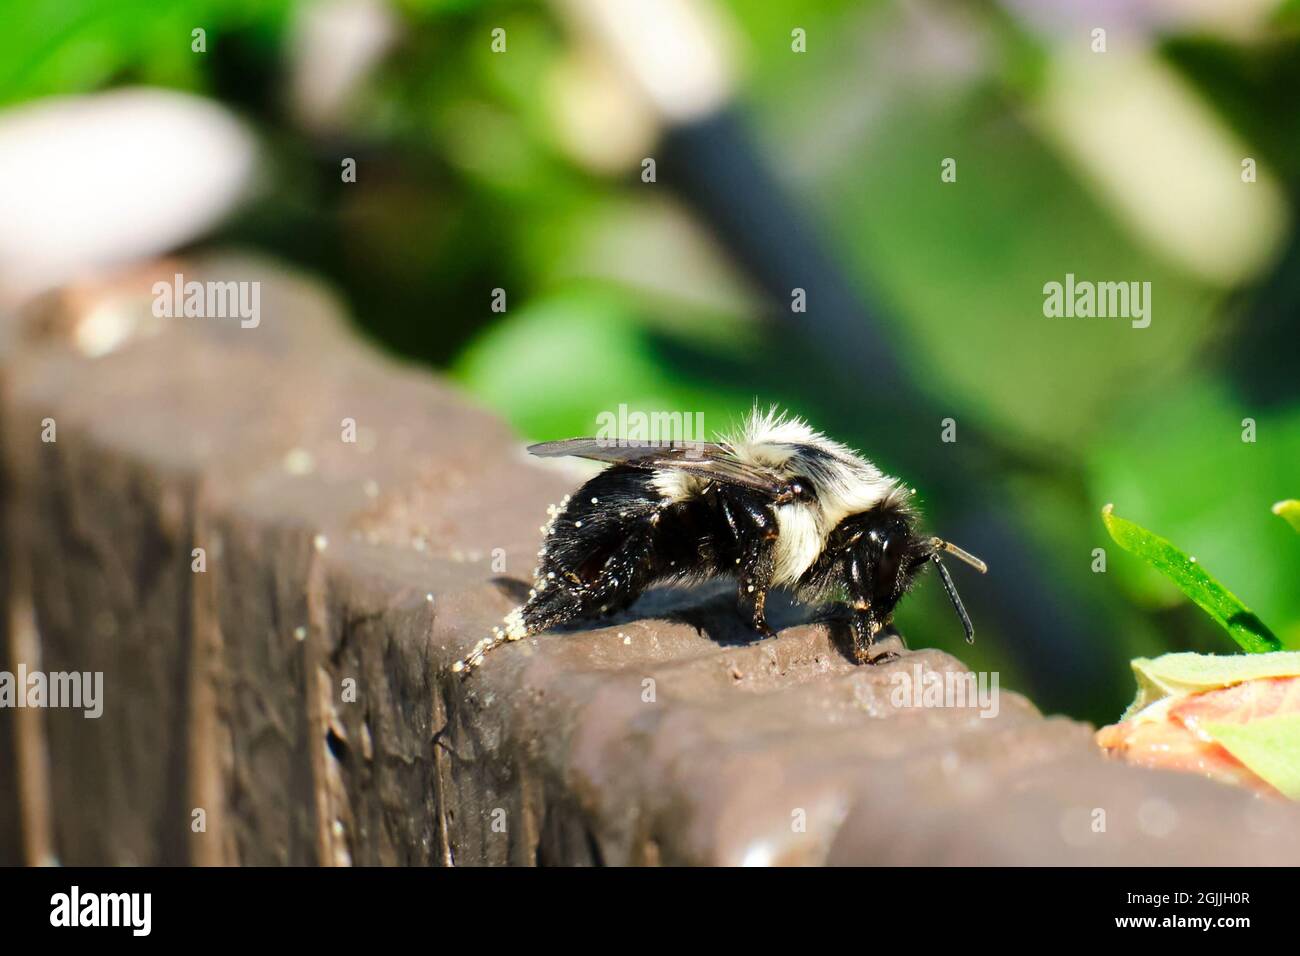 Common Eastern Bumble Bee (Bombus impatiens) sits on top of a brown fence Stock Photo